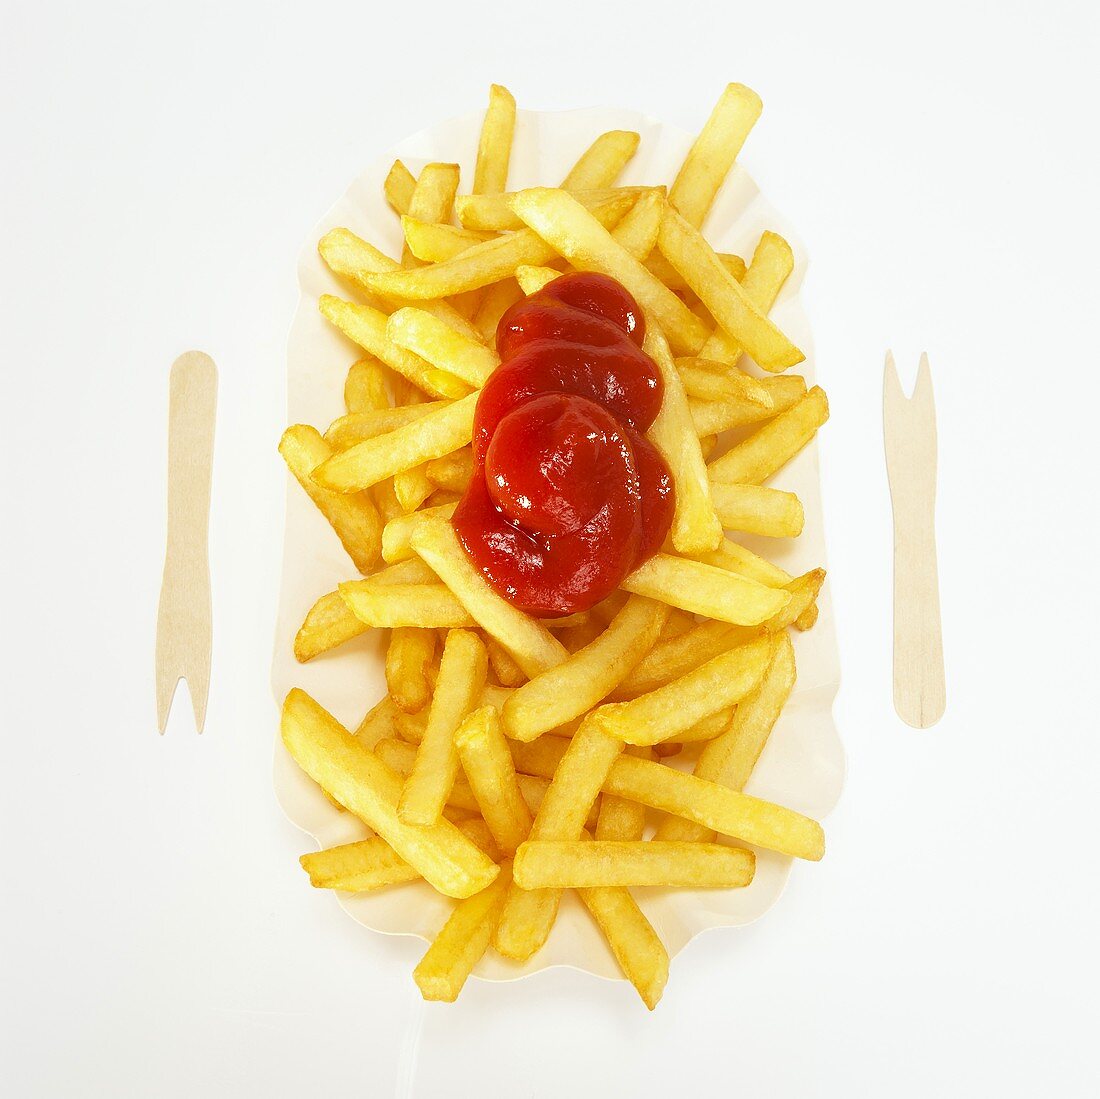 Ketchup on French fries, close-up, elevated view